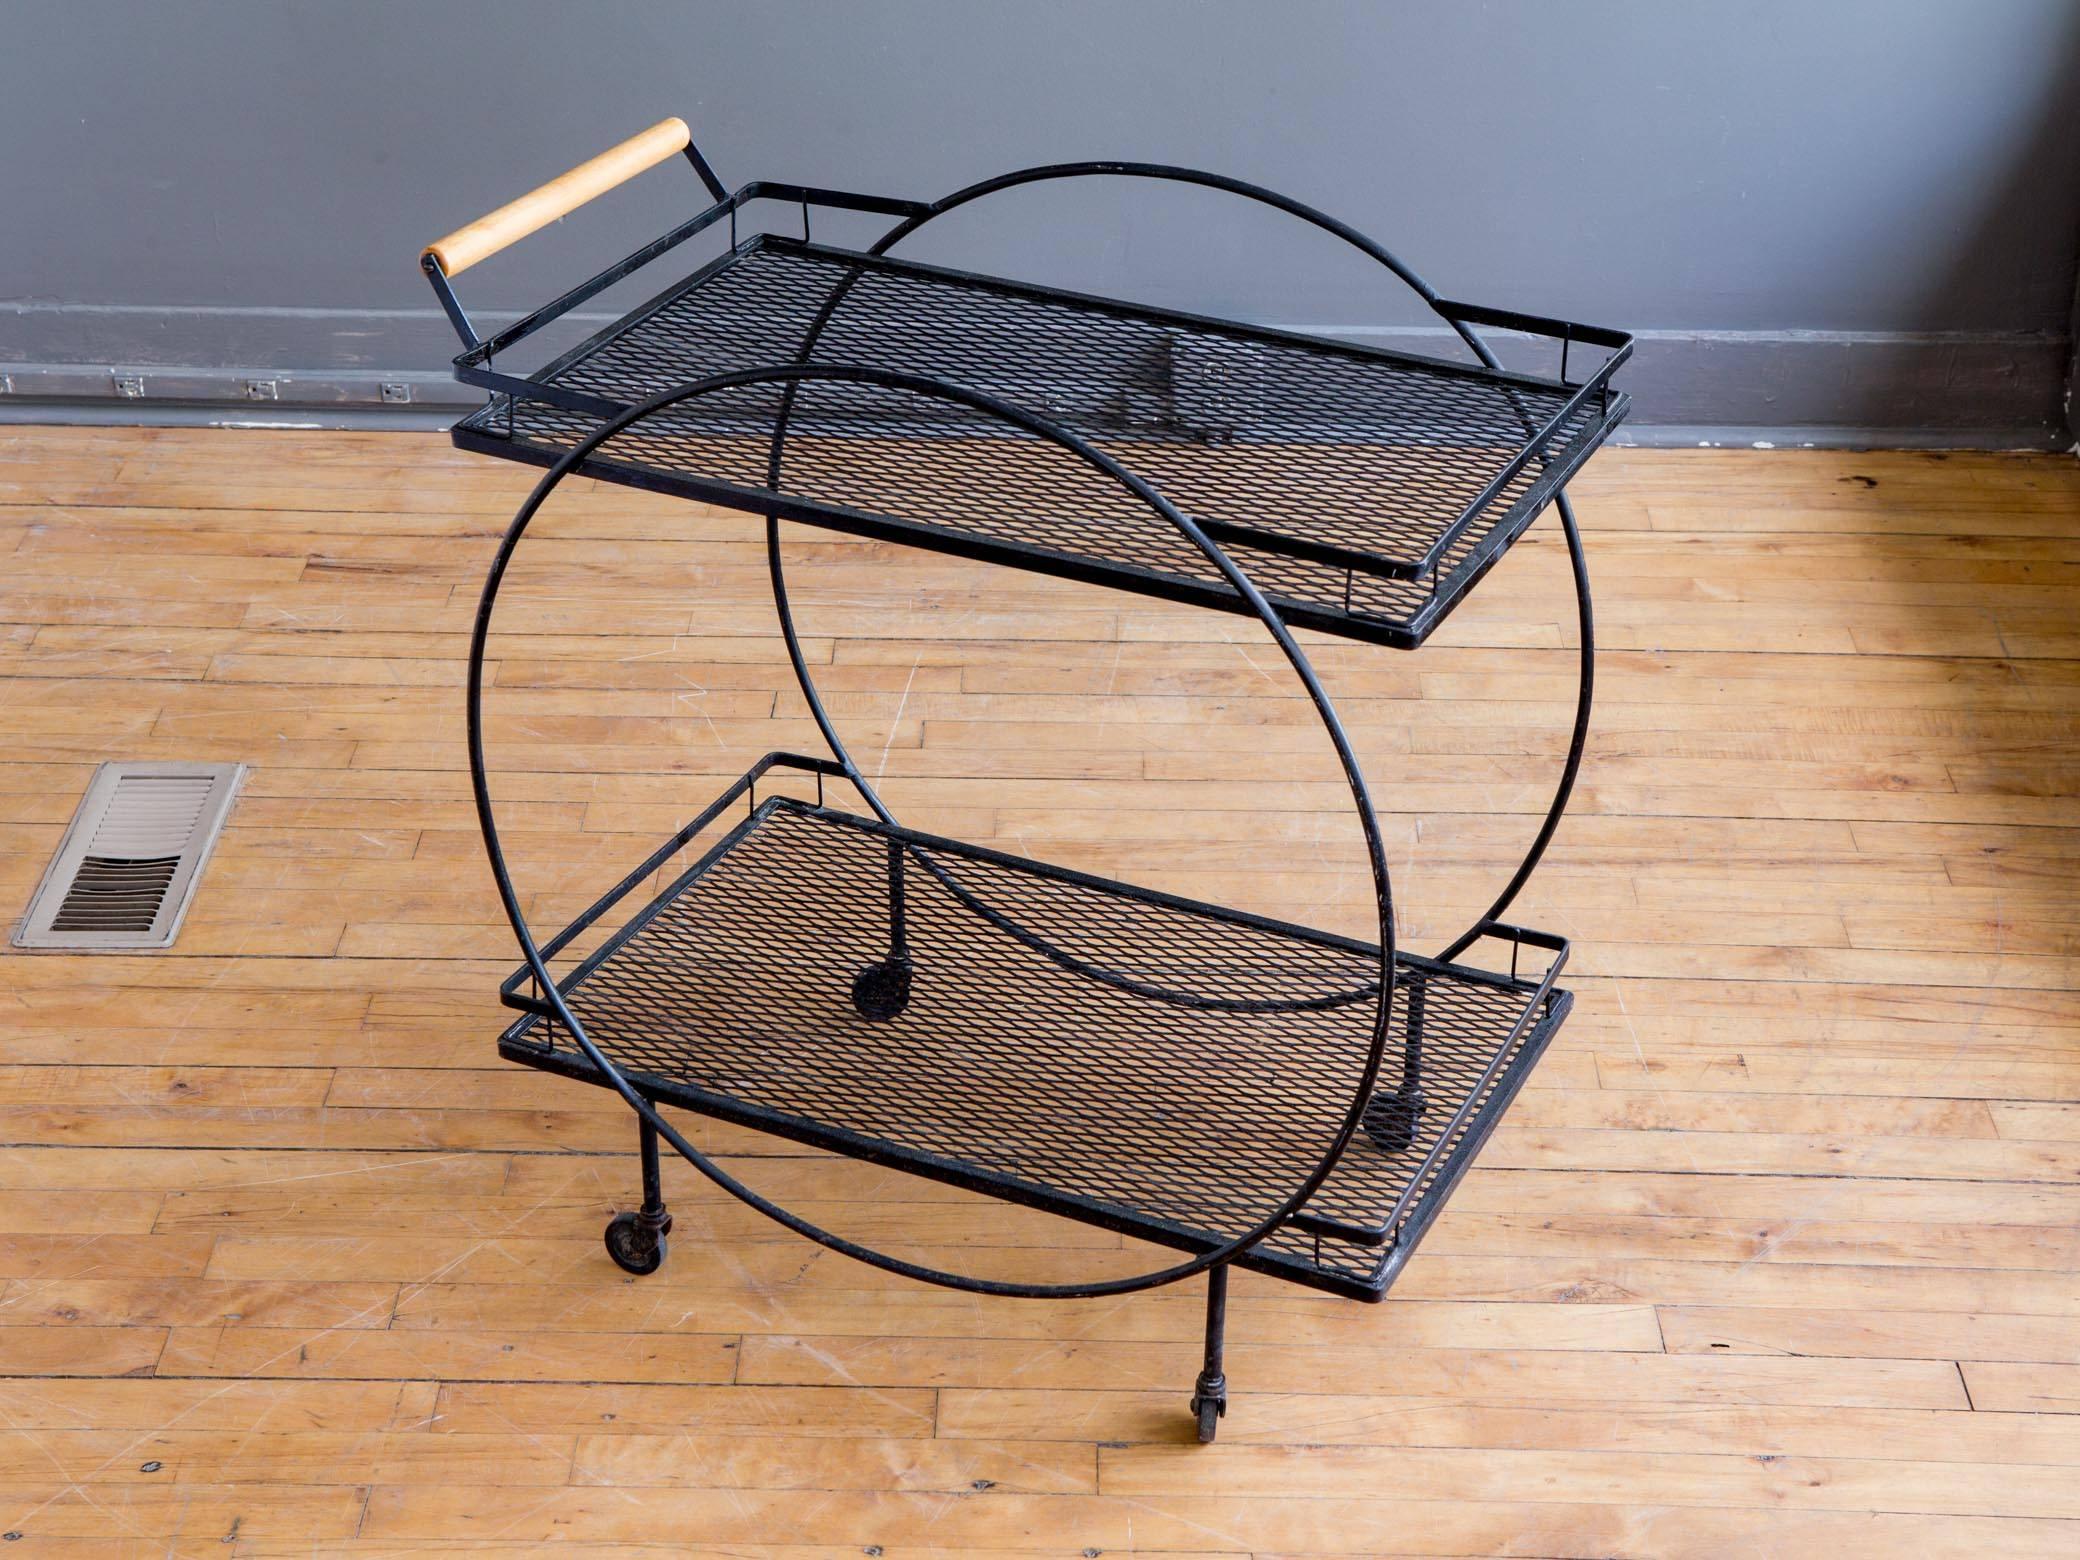 An iron bar cart or drinks trolley by American Industrial designer Freda Diamond, circa 1950s. Featuring a circular black frame with two metal mesh shelves all supported by four rubber casters. Round handle bar is fashioned from maple. A graphic and